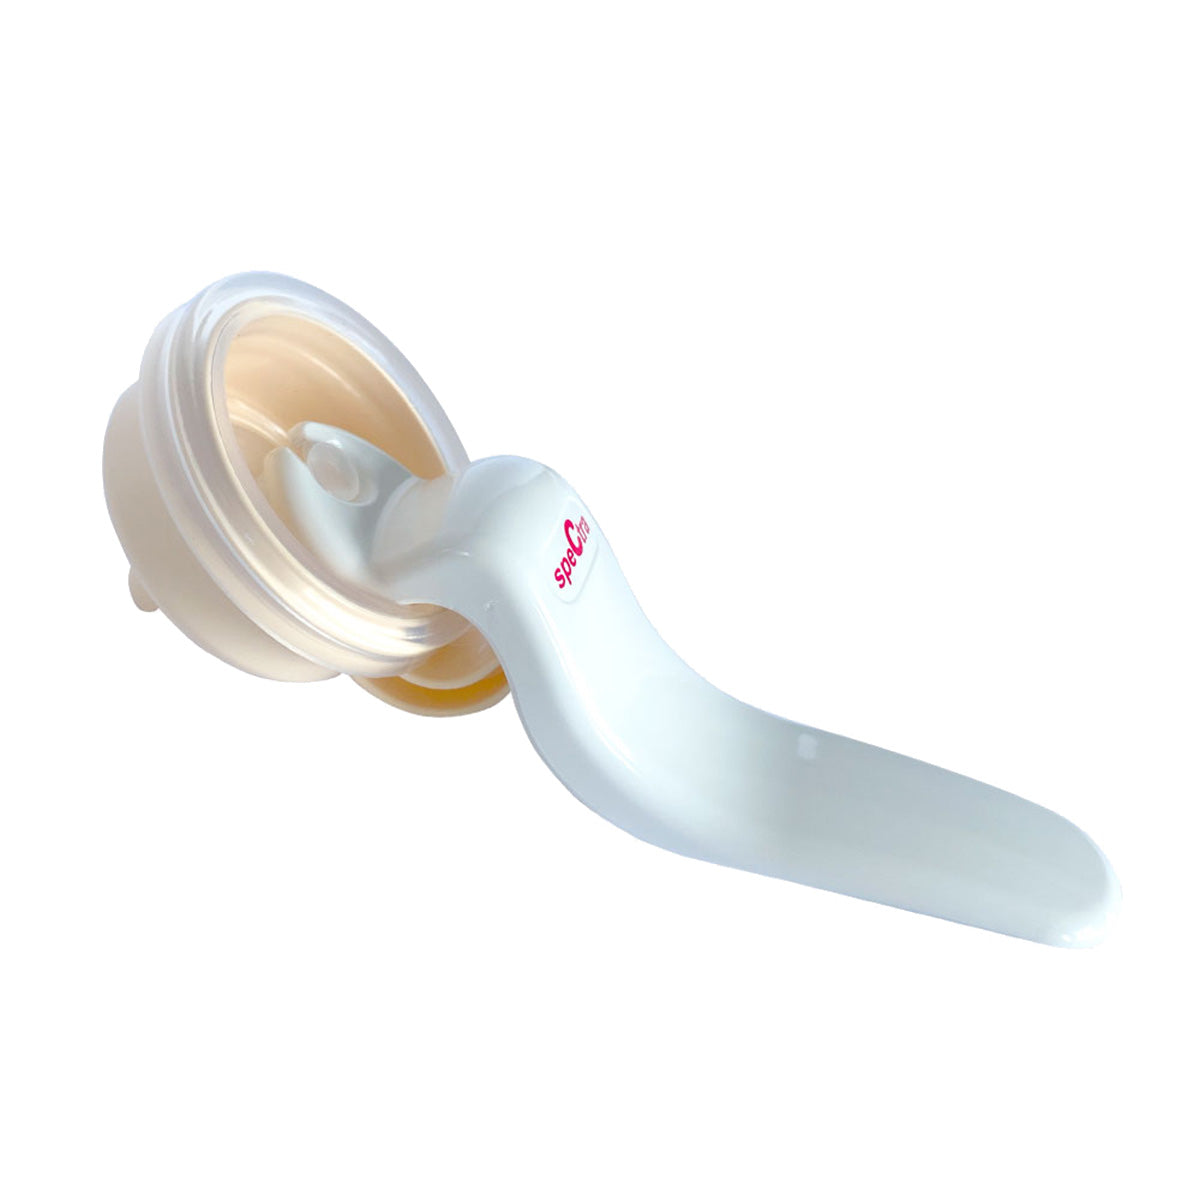 Spectra Dual Compact Double Breast Pump FOC Handsfree Cup (28mm x